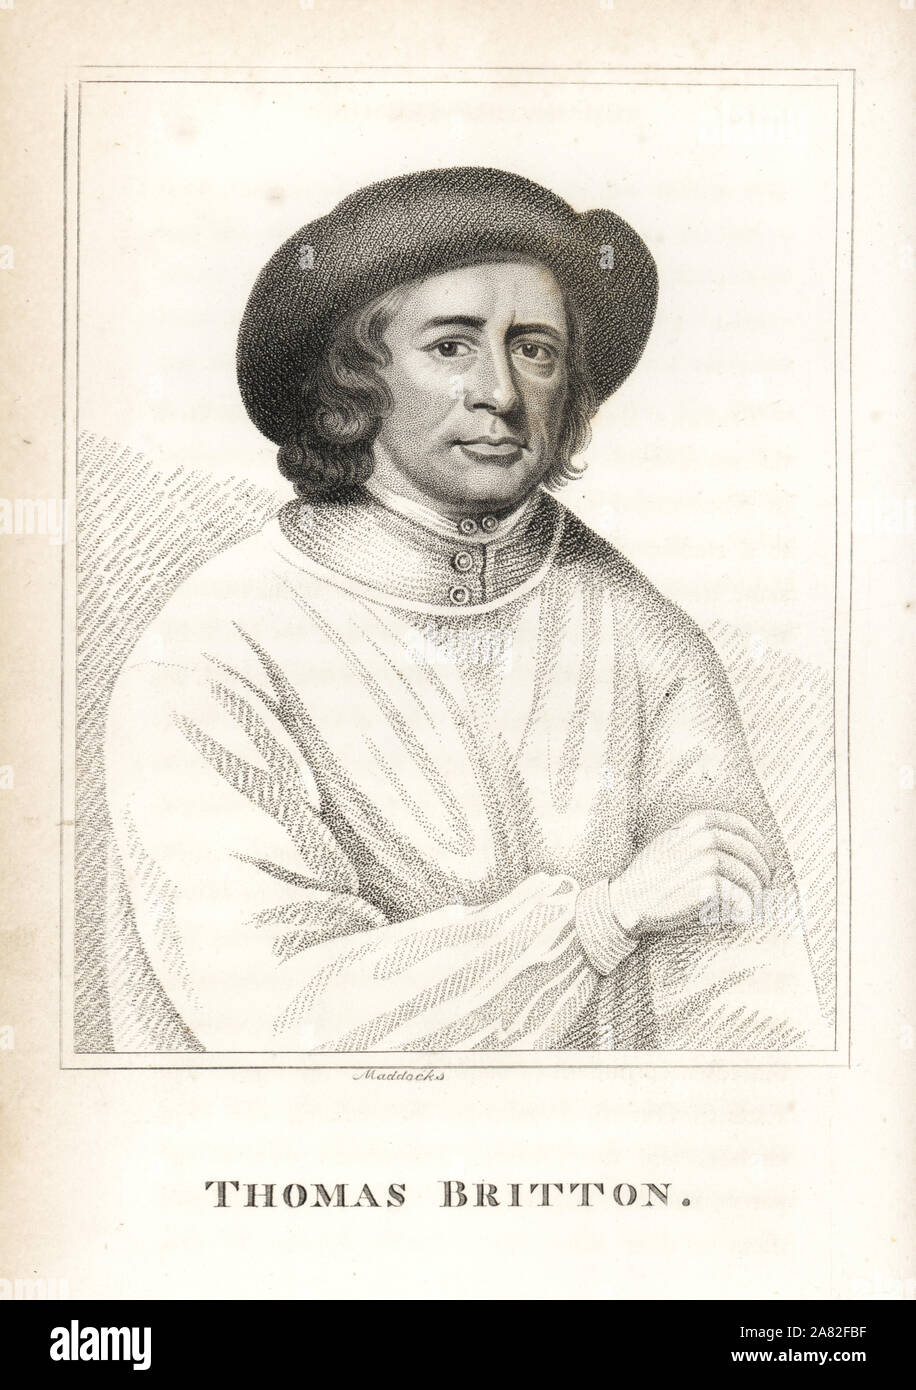 Thomas Britton, coal merchant and antiquarian book dealer, died 1714. Engraving by Maddocks from James Caulfield's Portraits, Memoirs and Characters of Remarkable Persons, London, 1819. Stock Photo